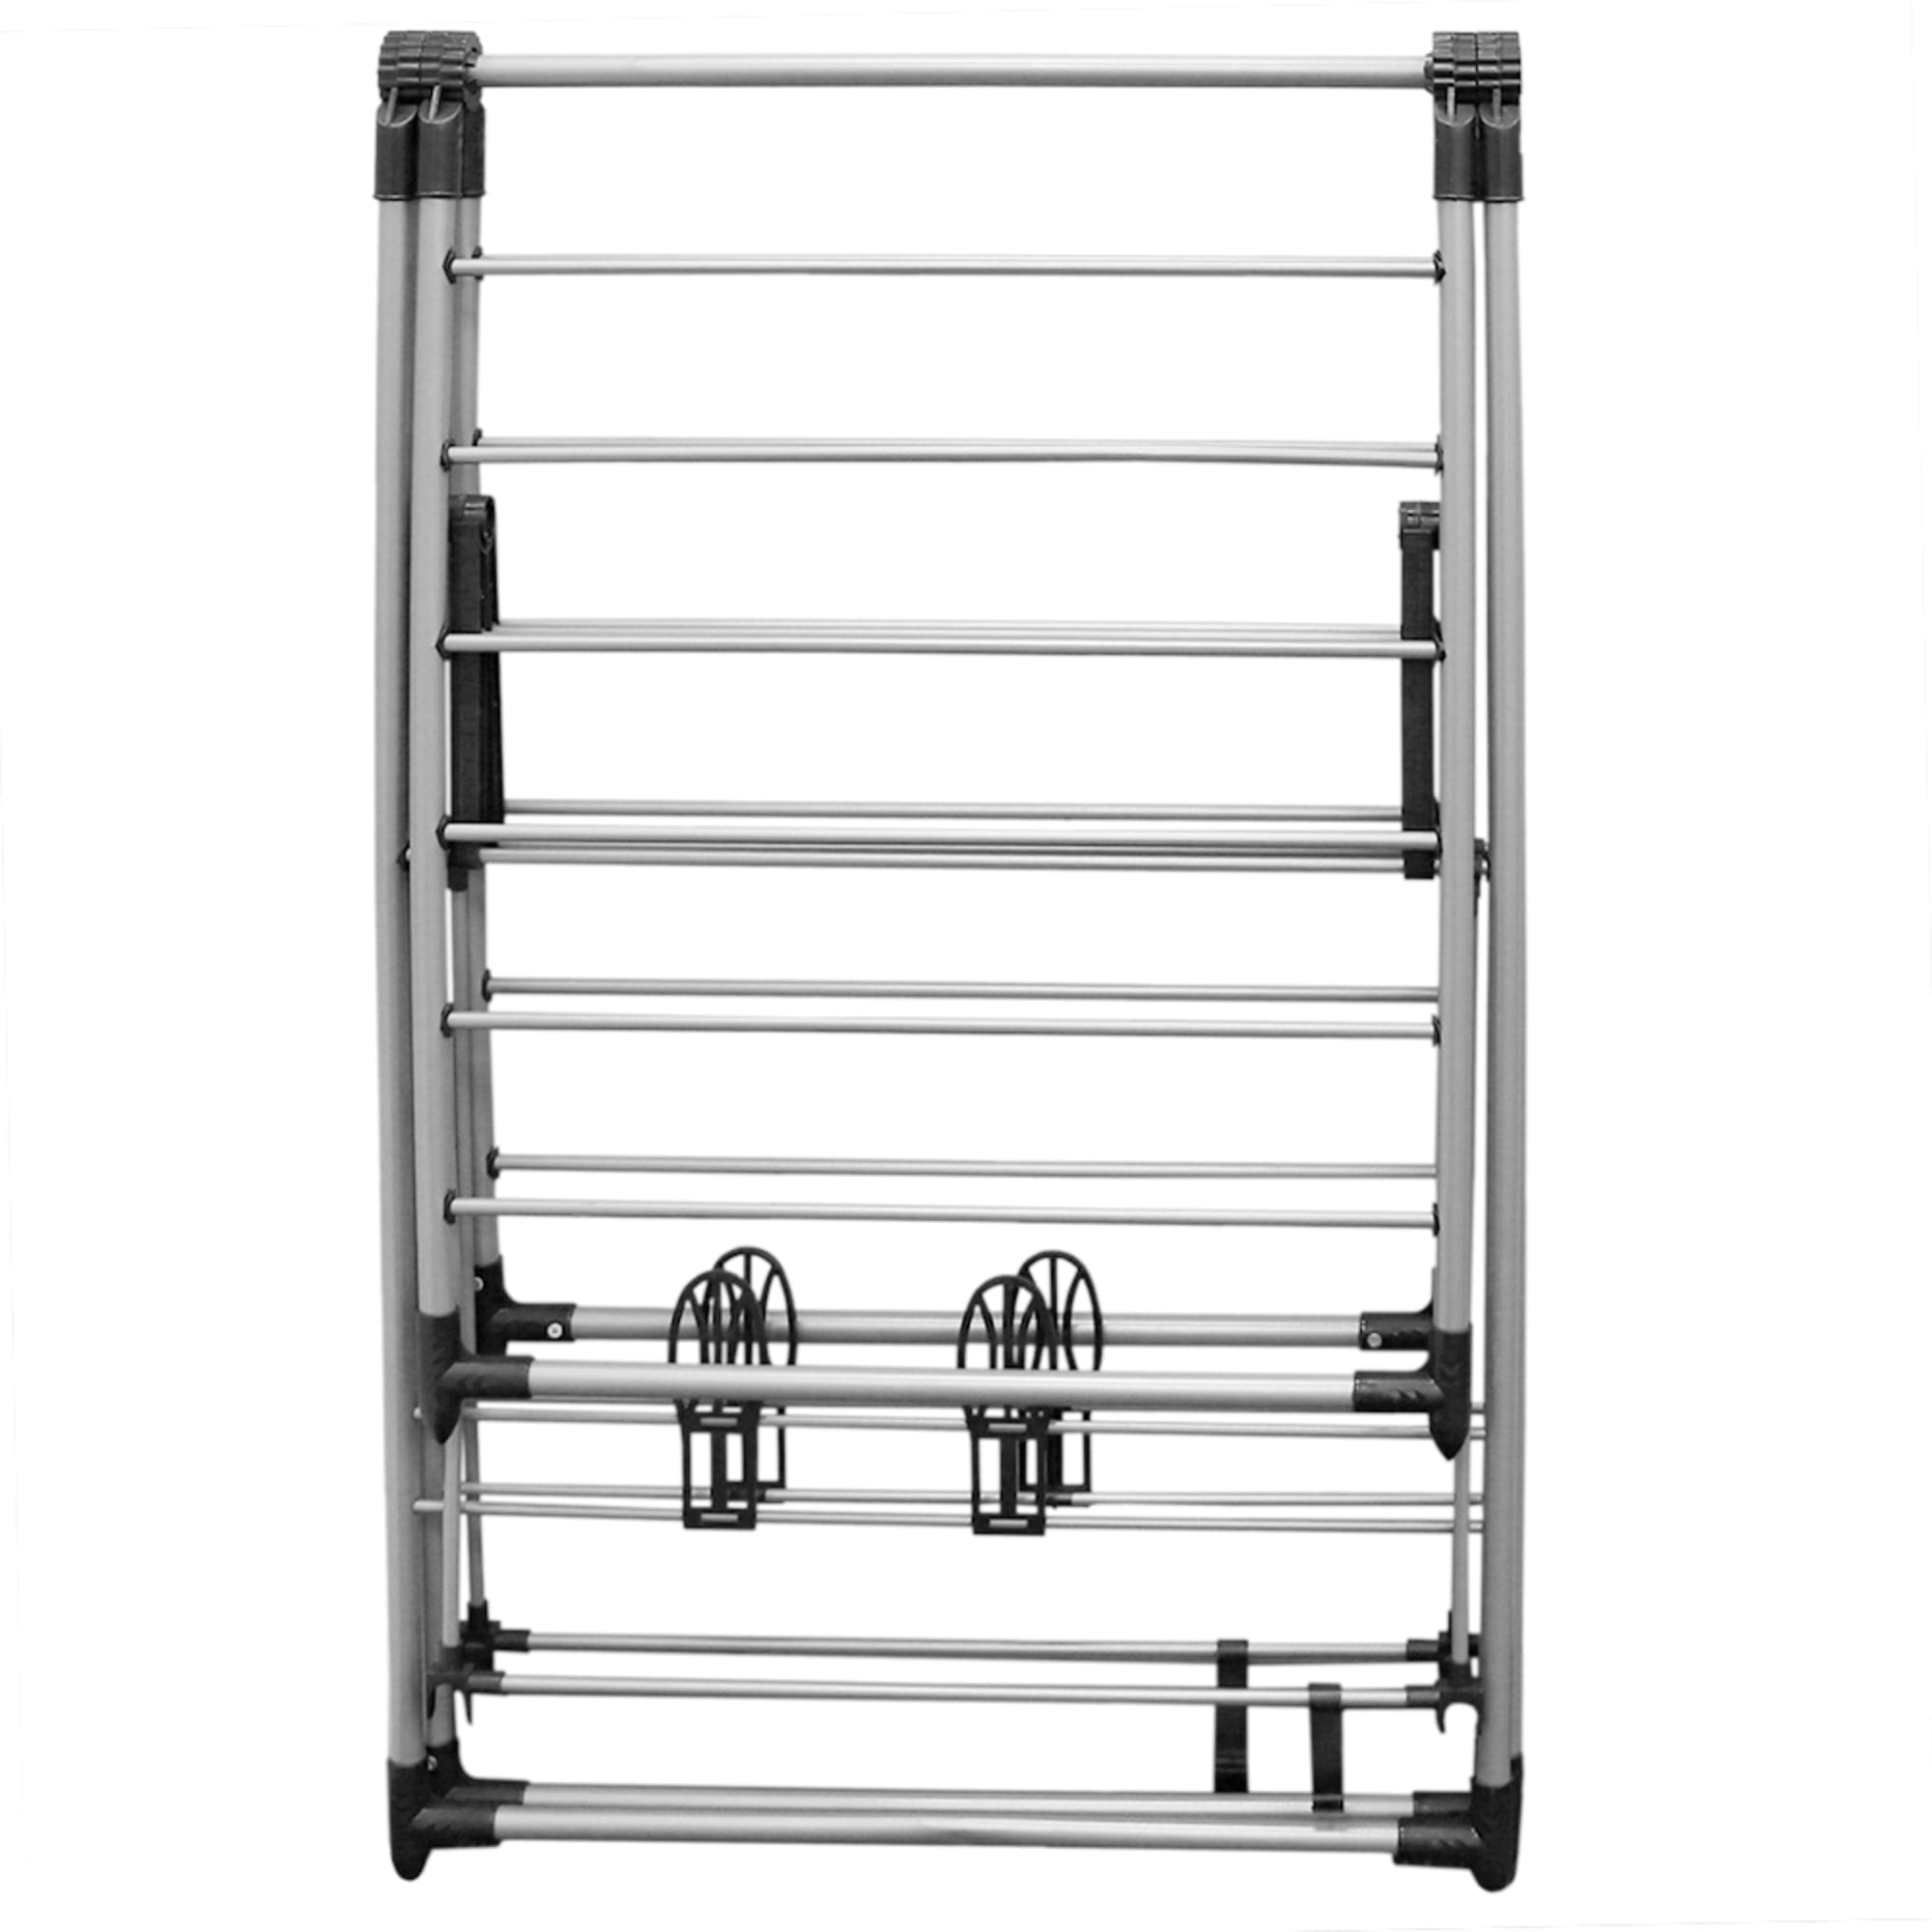 Sunbeam Collapsible Stainless Steel Folding Clothes Drying Rack with Shoe Clips, Grey $20.00 EACH, CASE PACK OF 6